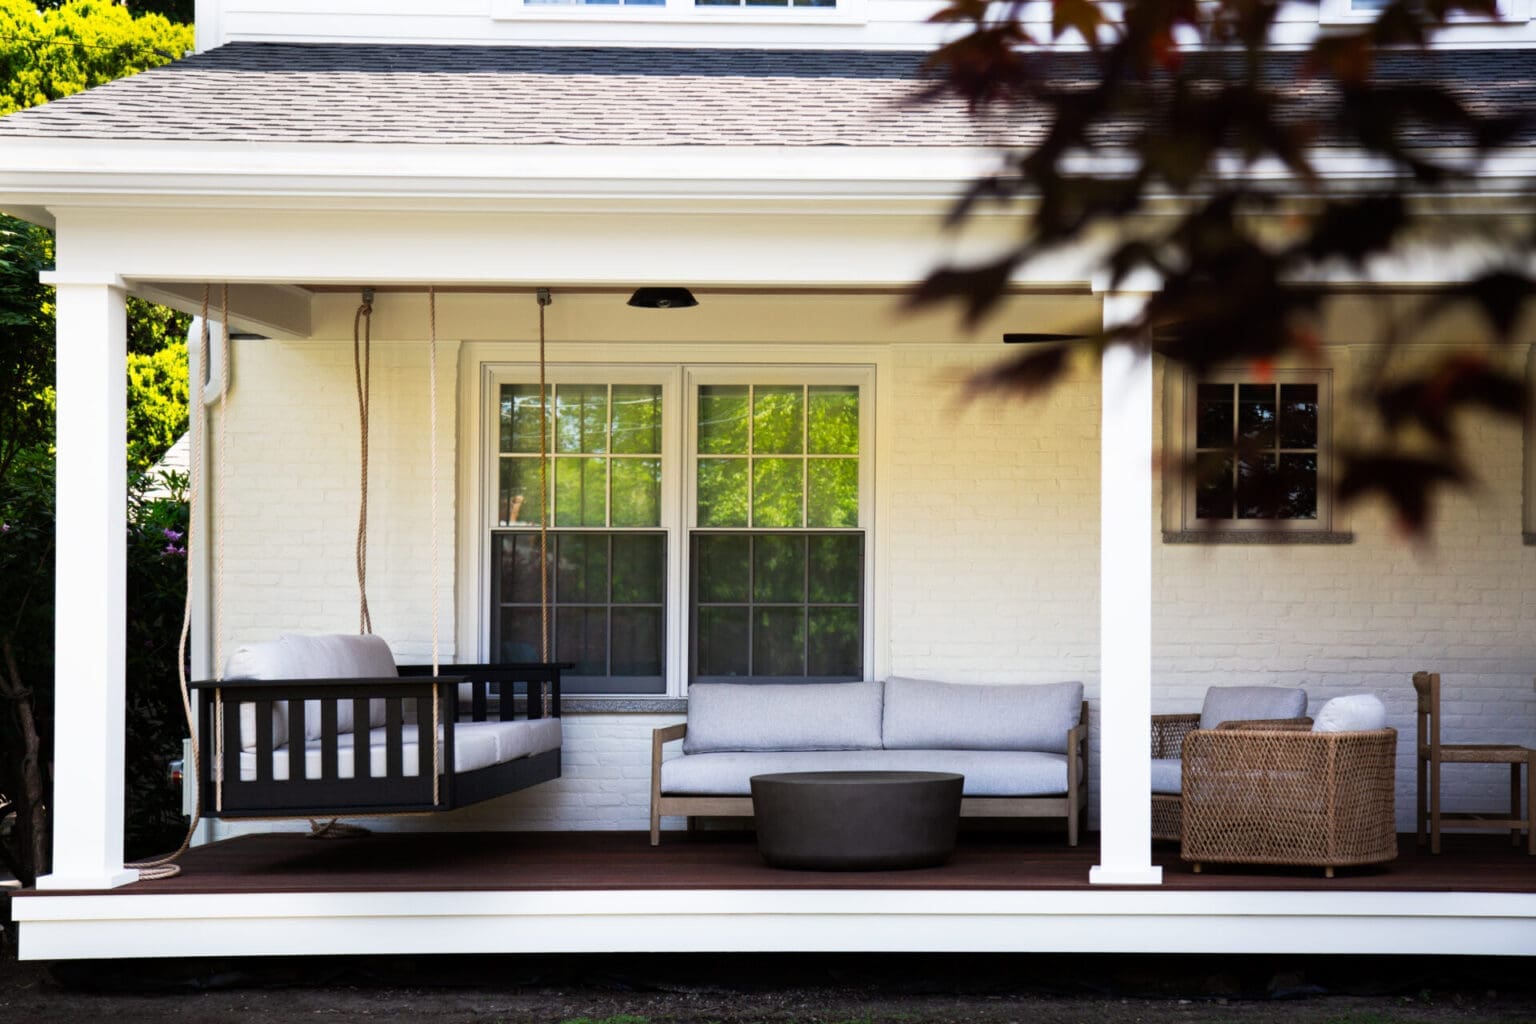 A photo of a farmers porch with white square pillars, white brick wall, dark brown wooden flooring, and assorted outdoor furniture with grey cushions.